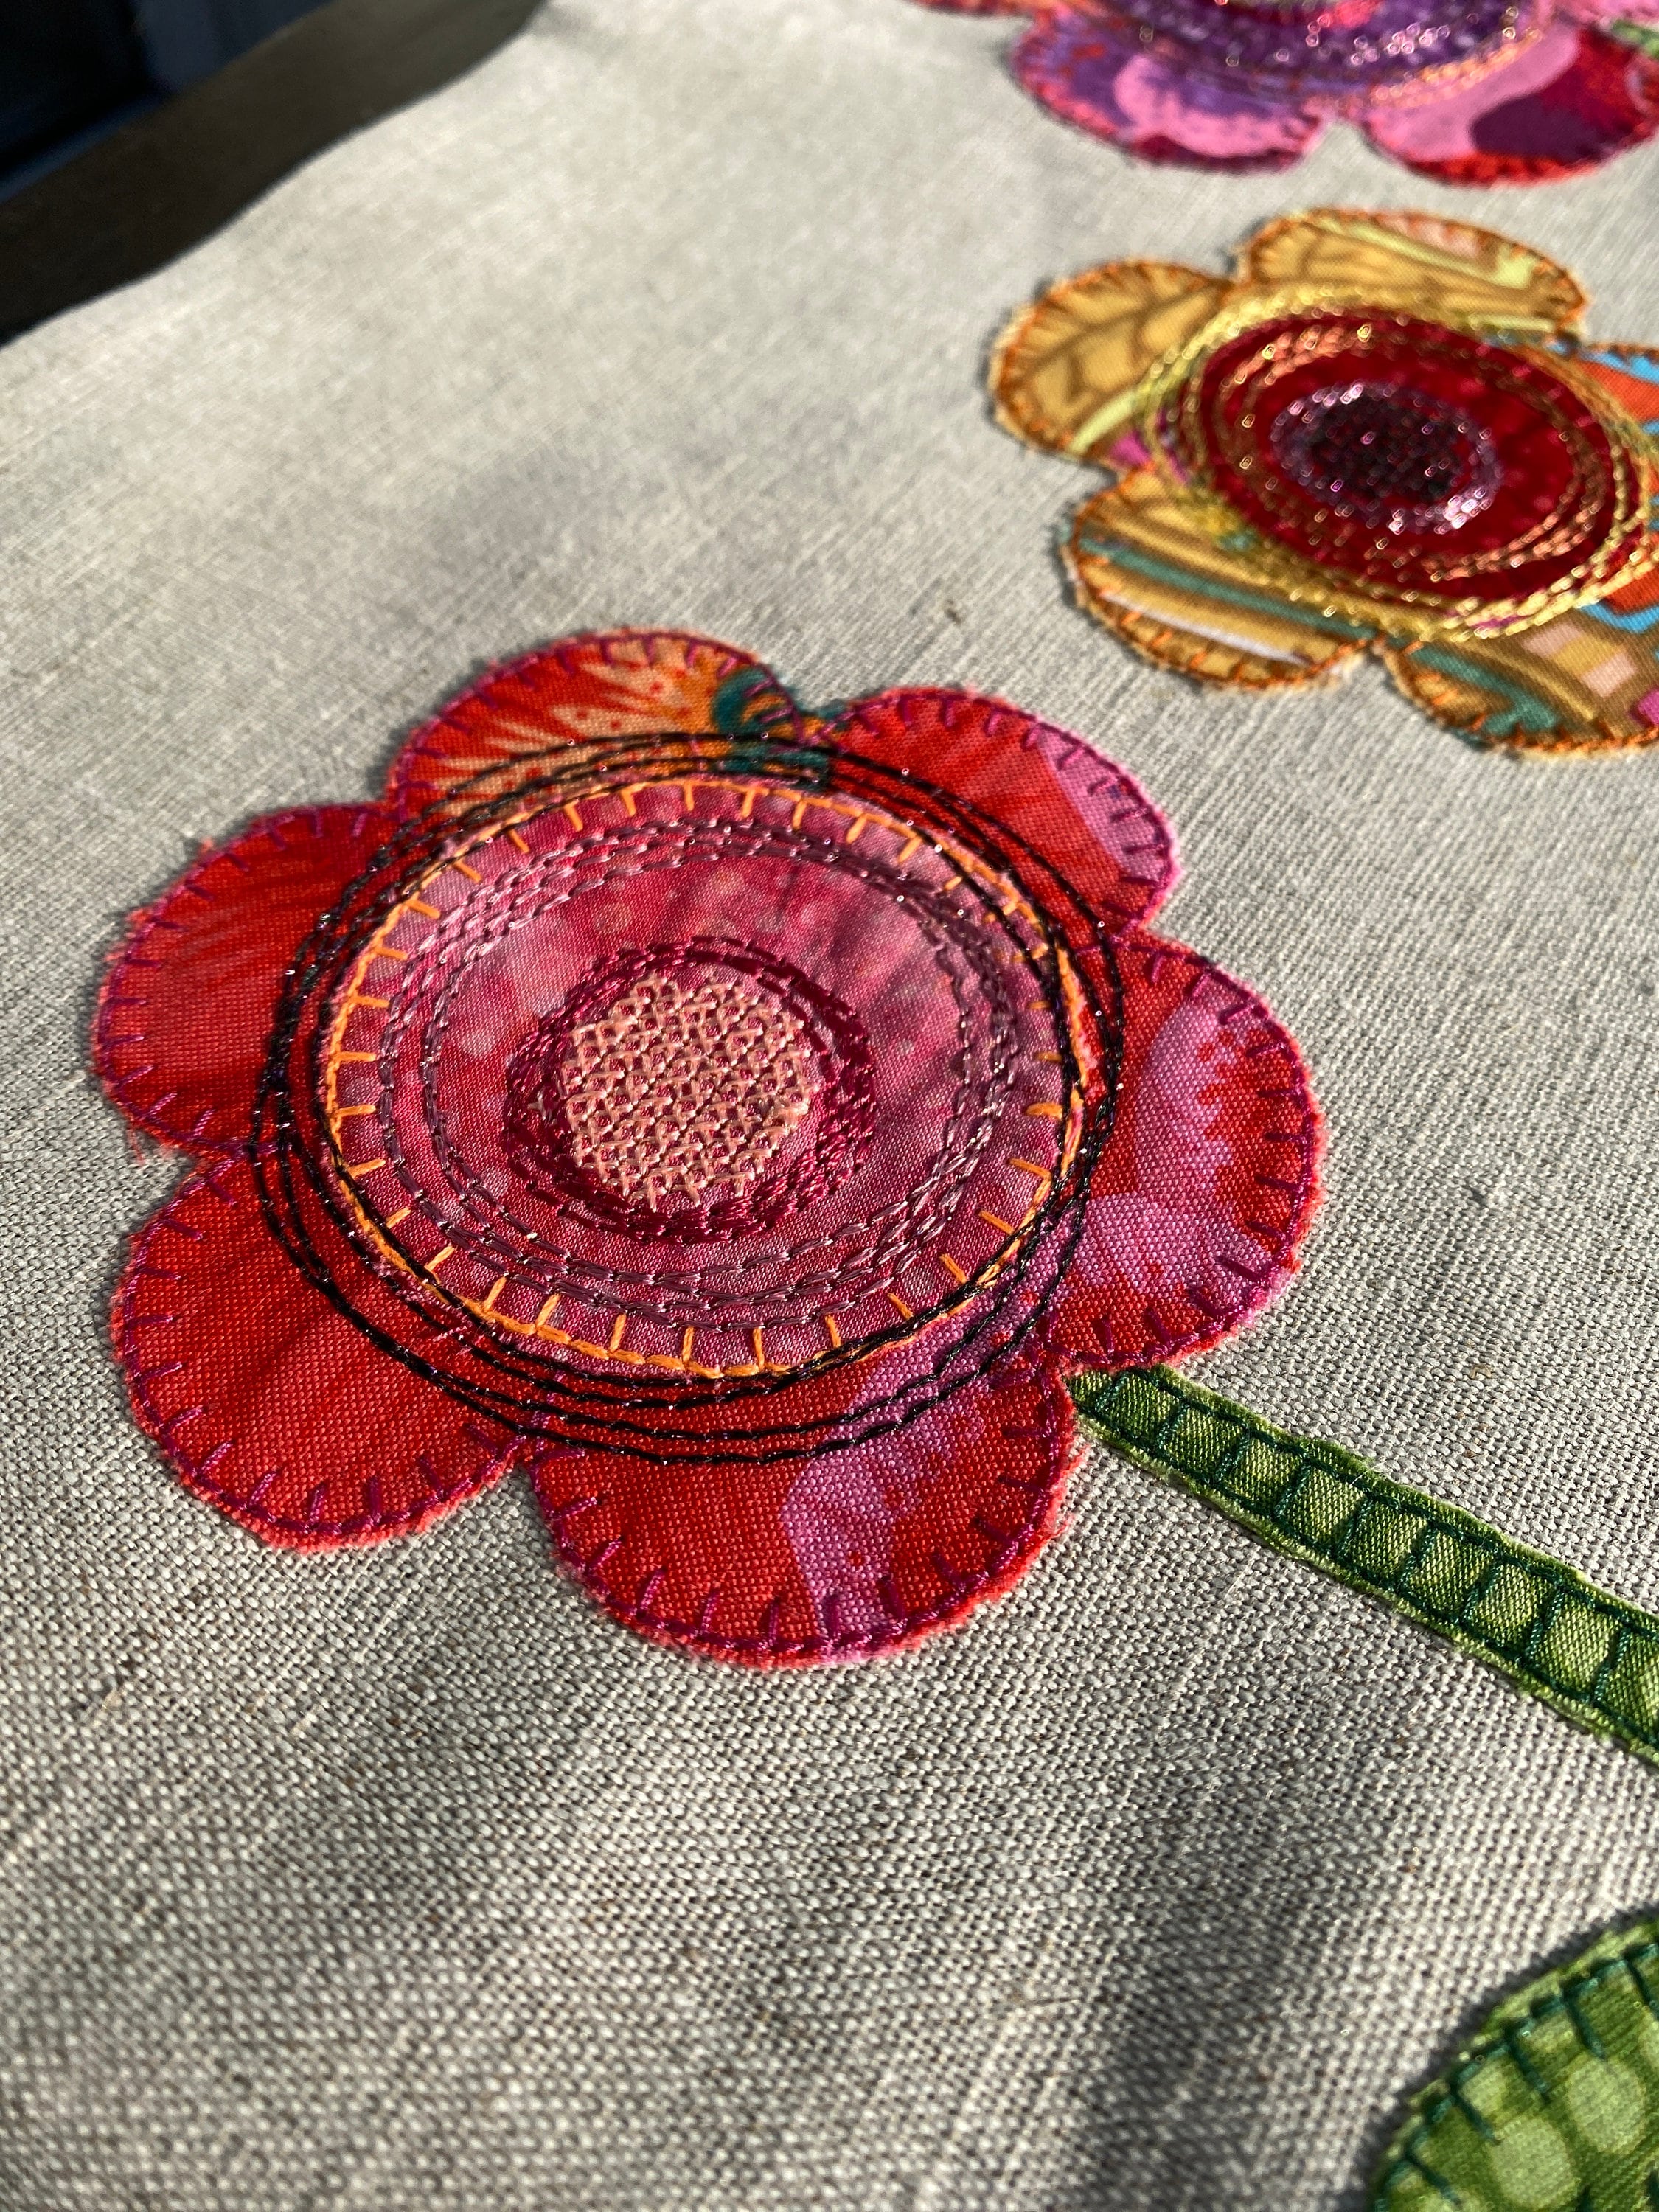 Floral Applique and Machine Embroidery Designs  Rosieday Embroidery –  tagged applique flower embroidery – RosiedayEmbroidery